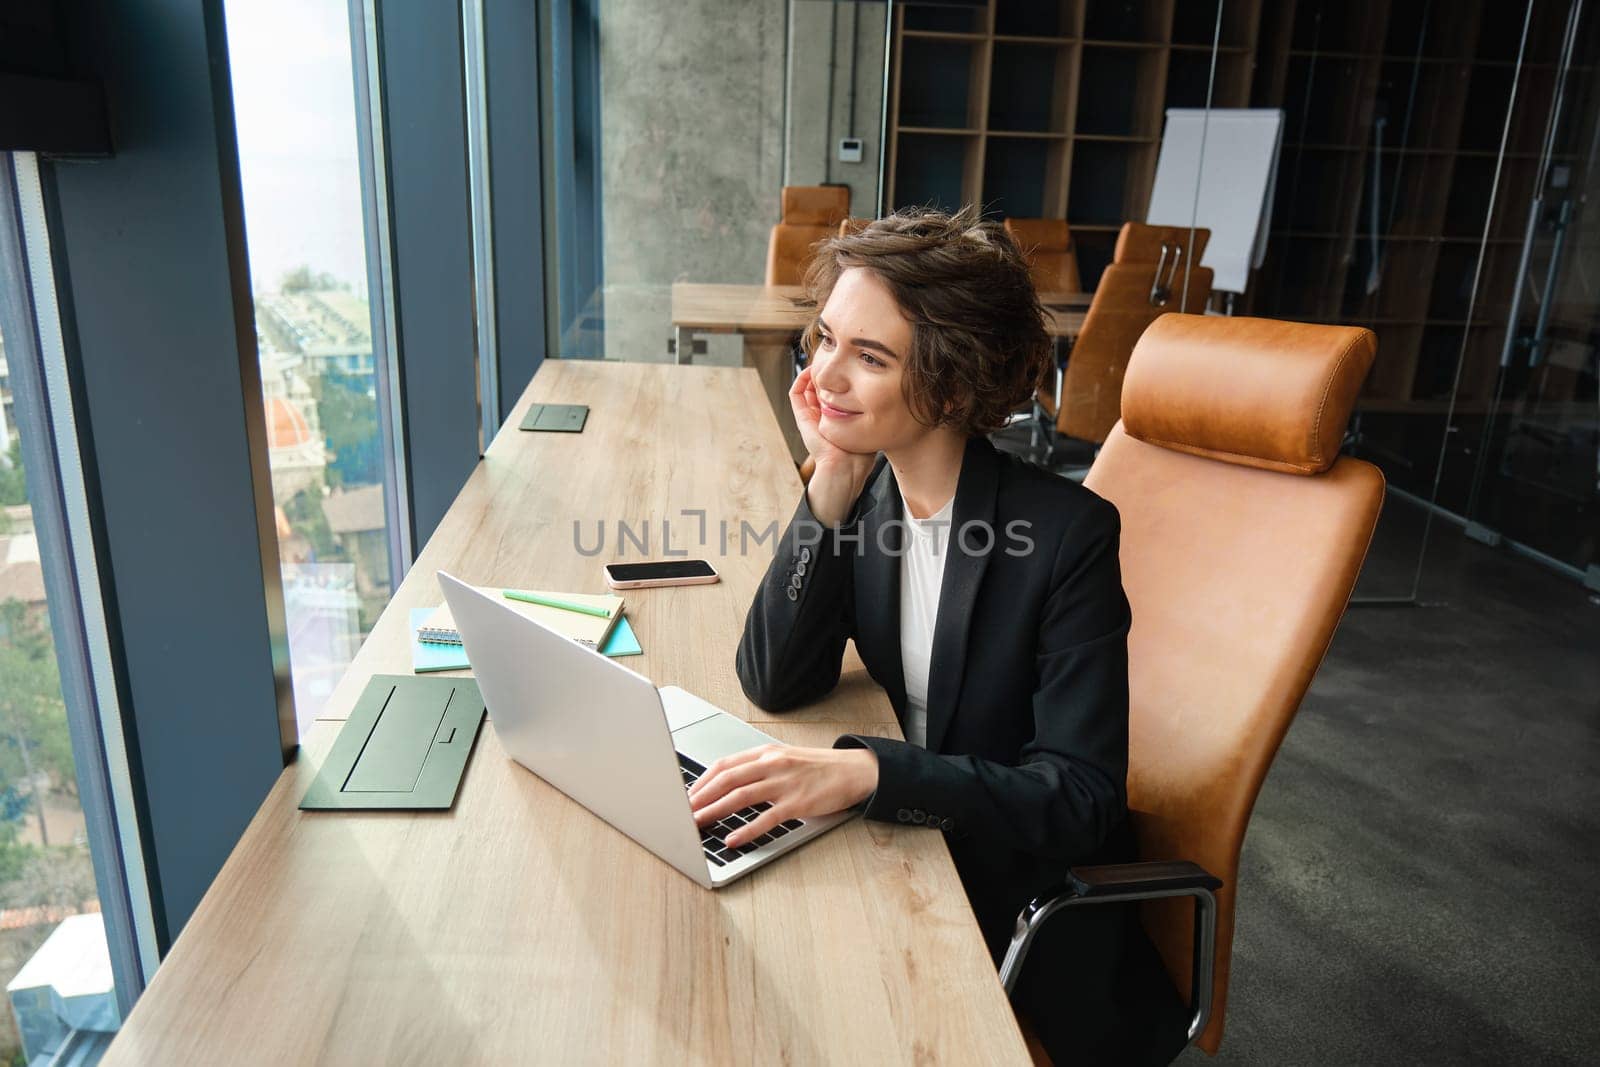 Businesswoman working on laptop, sitting in office in suit, waiting for client, preparing documentation for corporate meeting, using coworking space to focus on her work.